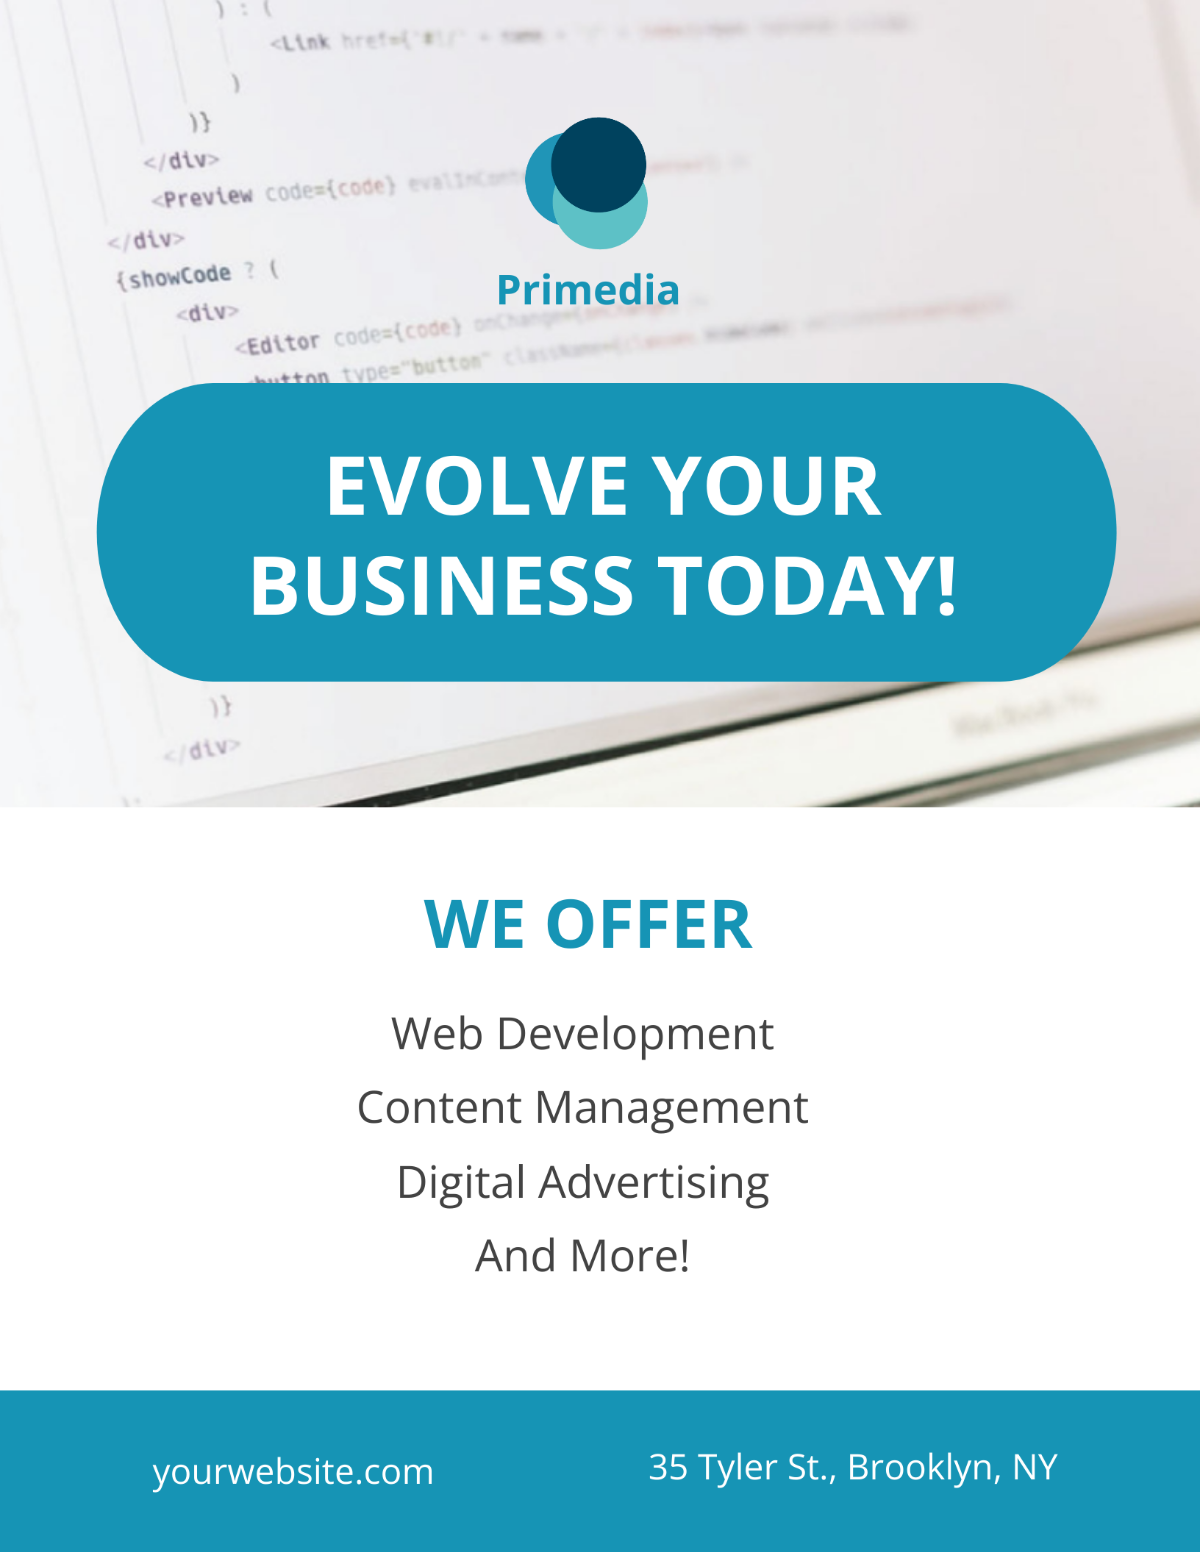 Business Services Flyer Template